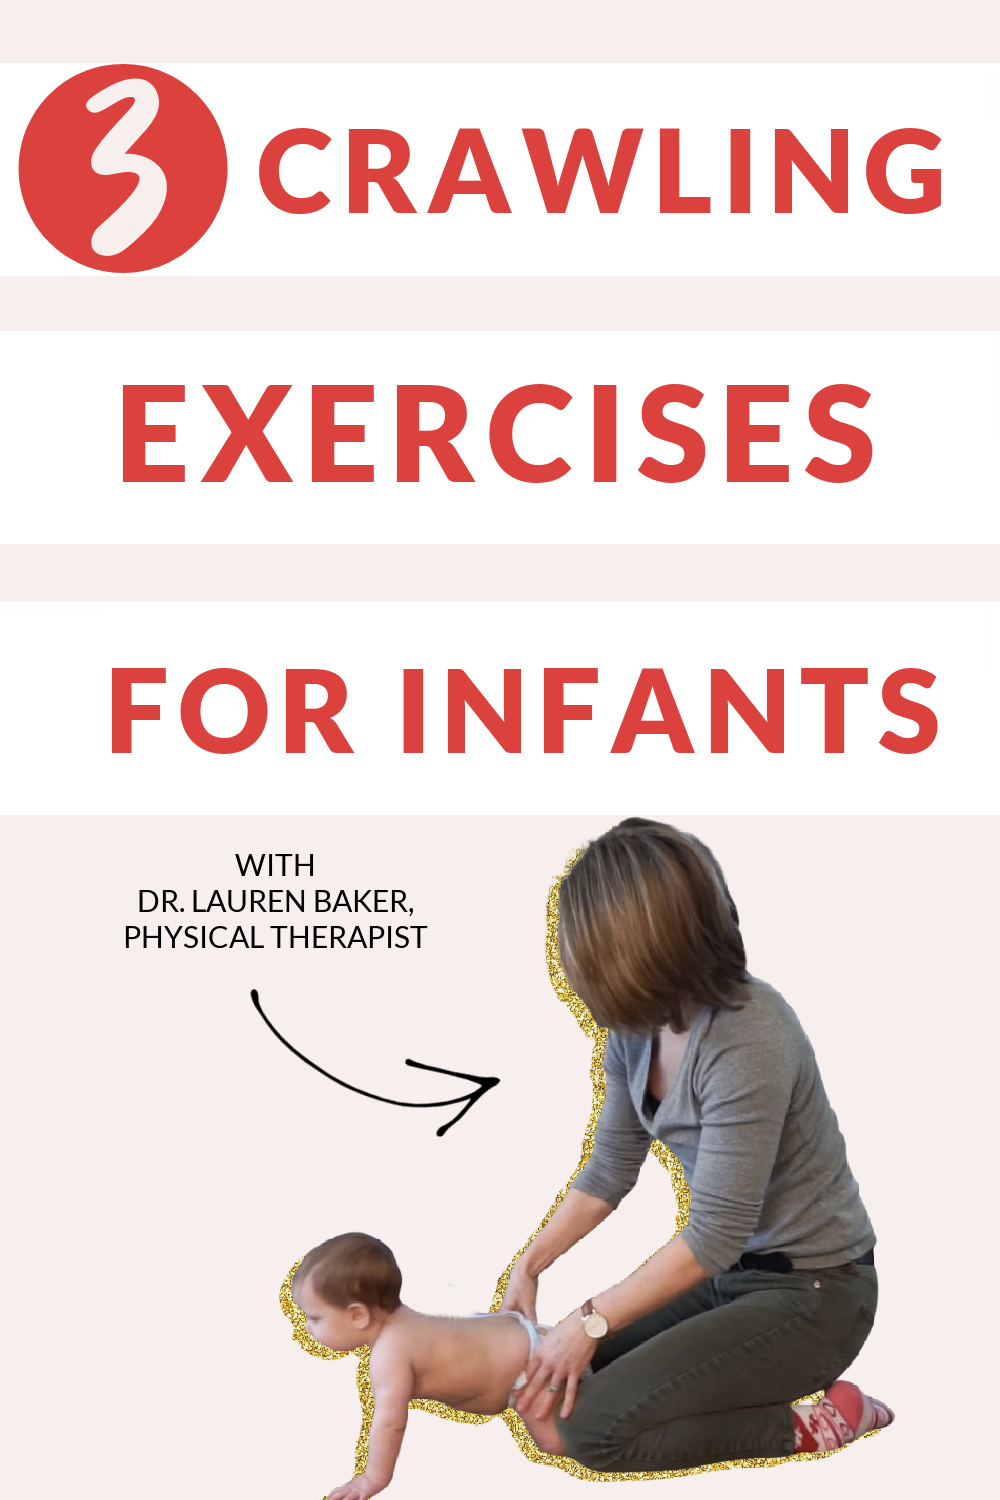 3 Crawling Exercises For Infants — In Home Pediatric Physical Therapy in  Boise and the Treasure Valley